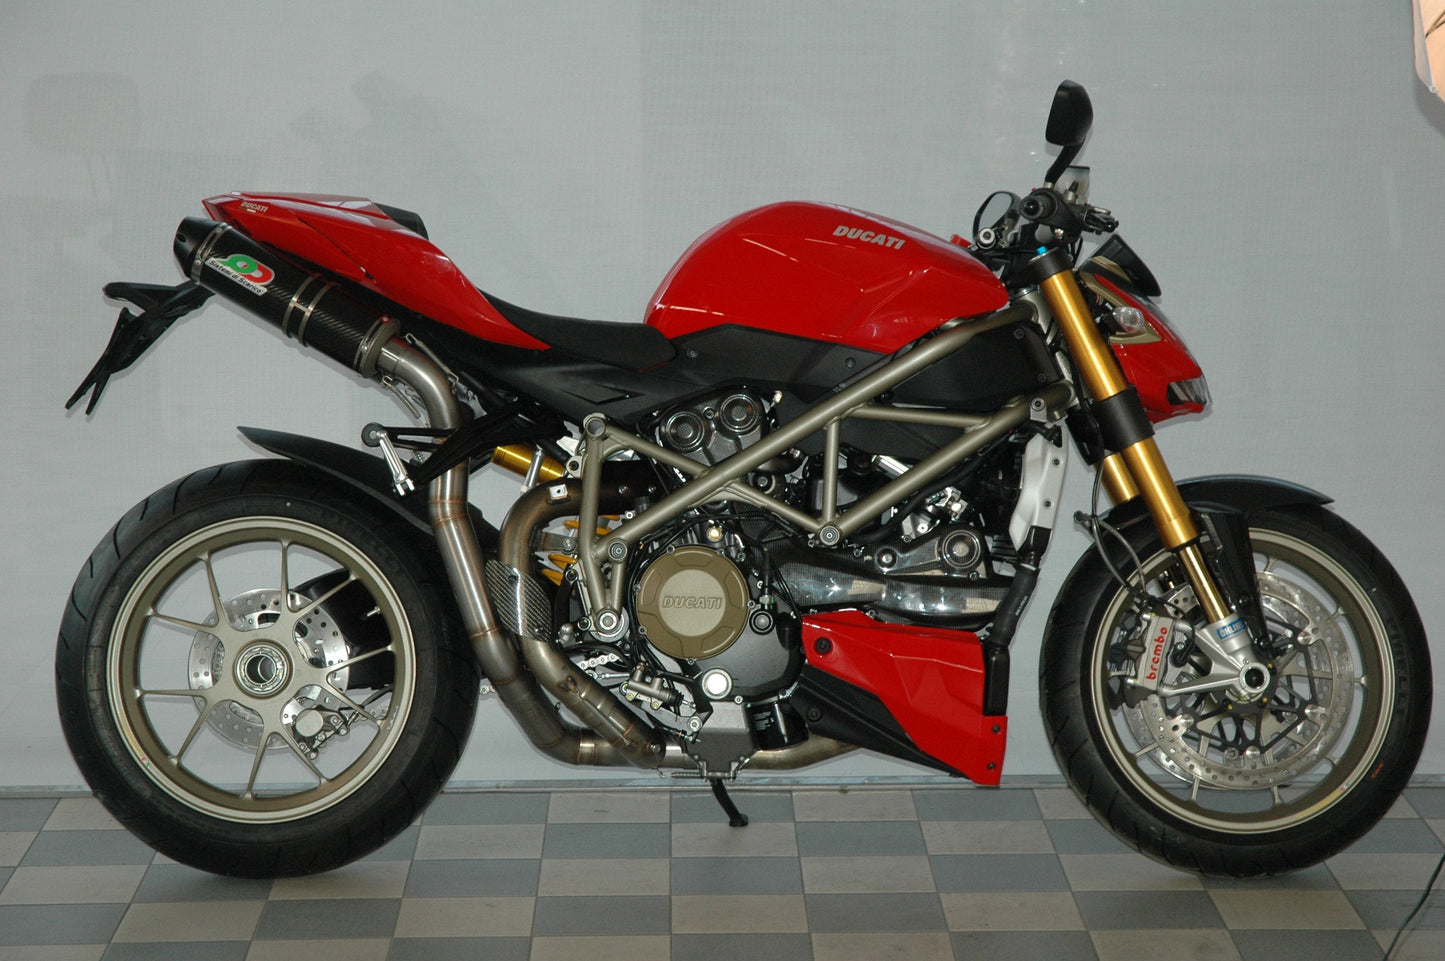 QD EXHAUST Ducati Streetfighter 1098/848 Full Exhaust System "Magnum" (EU homologated)